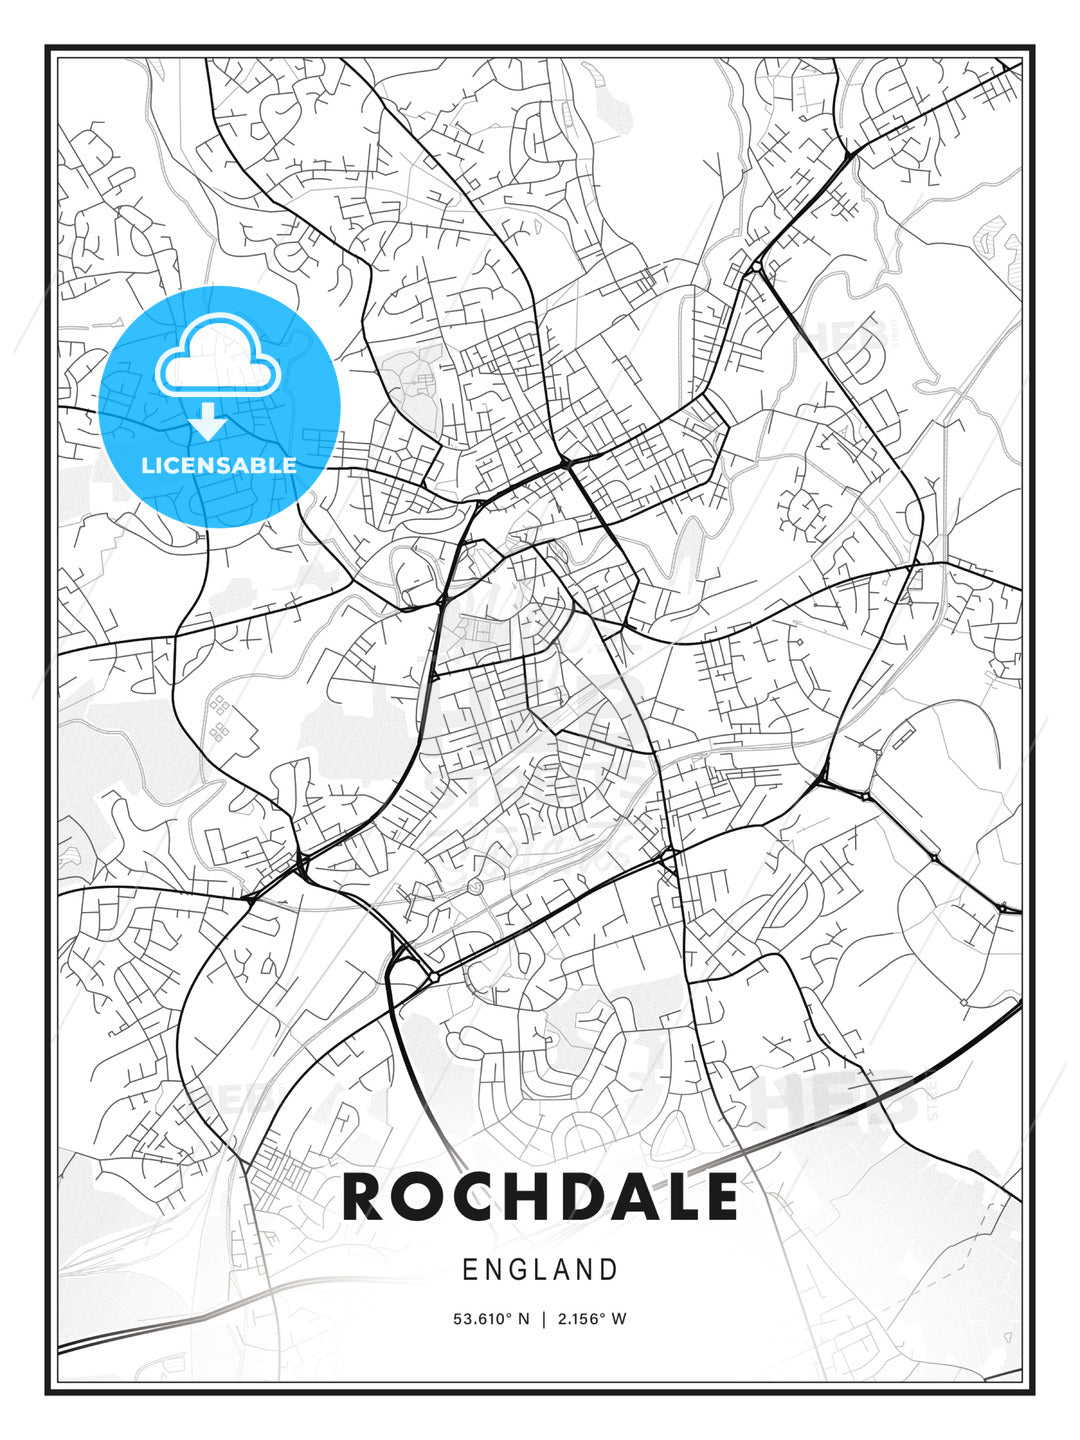 Rochdale, England, Modern Print Template in Various Formats - HEBSTREITS Sketches